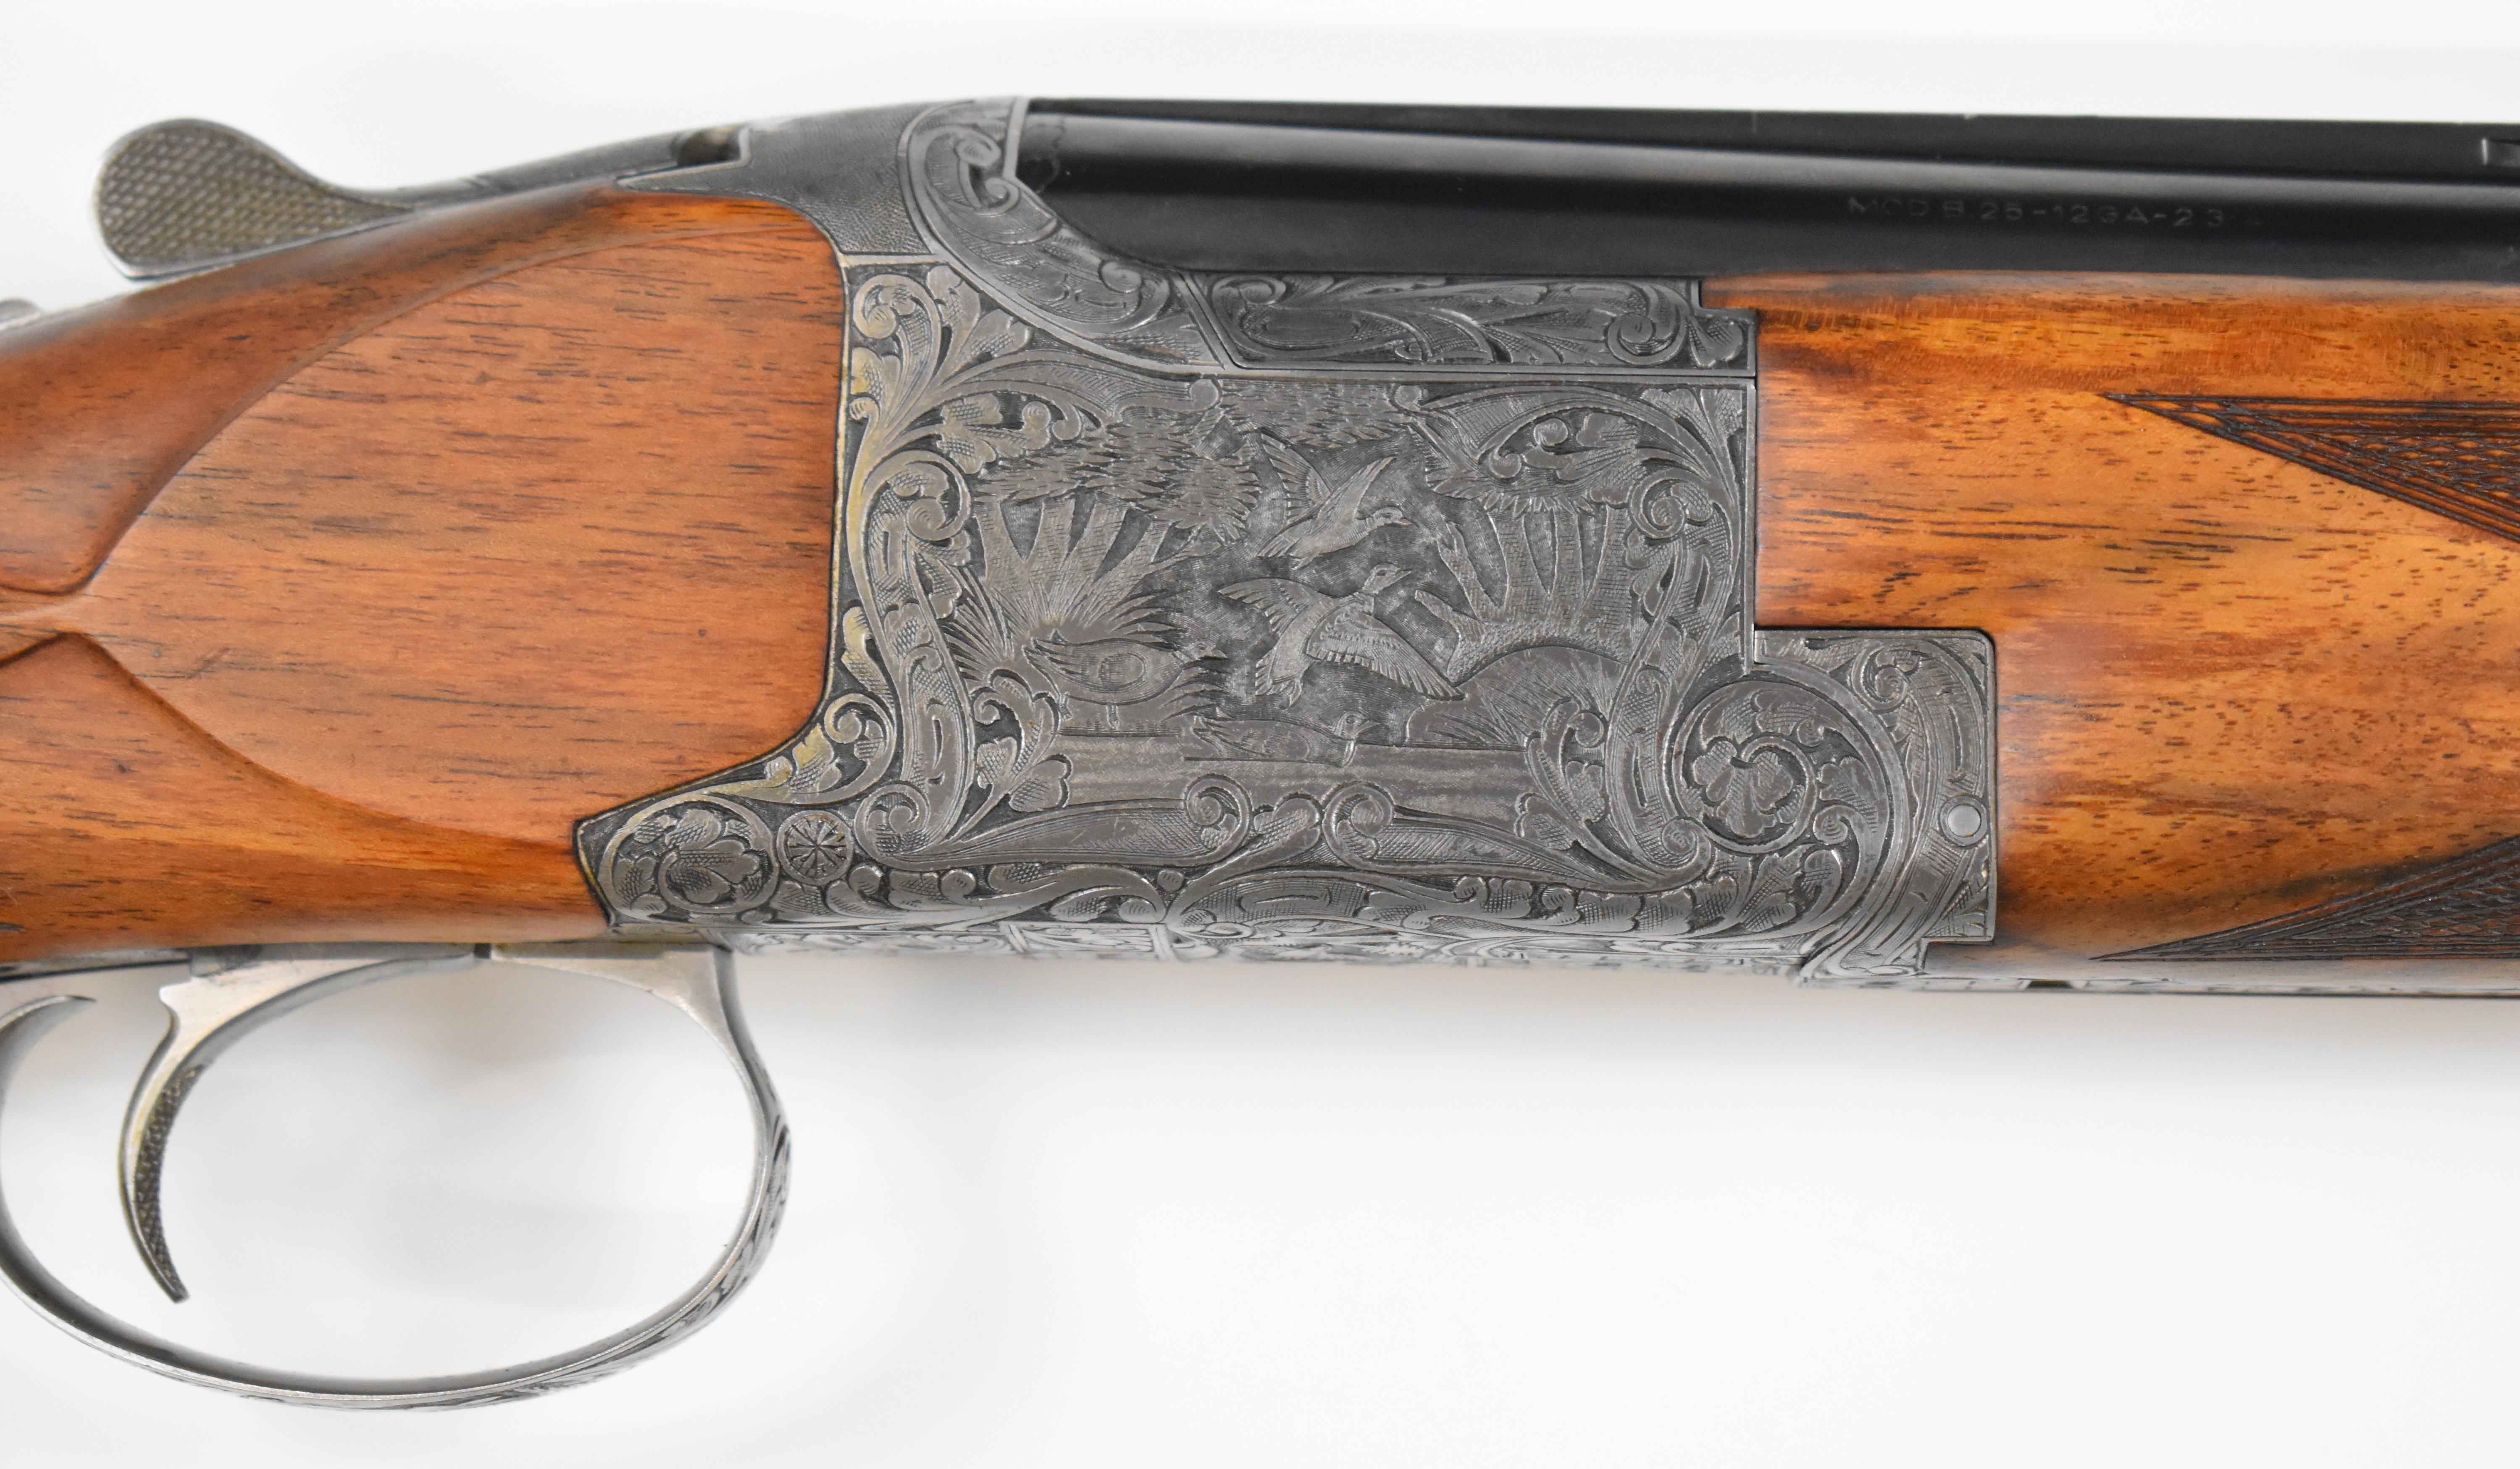 Browning B25 Diana 12 bore over and under ejector shotgun with Pierre Lallemand engraved scenes of - Image 21 of 30